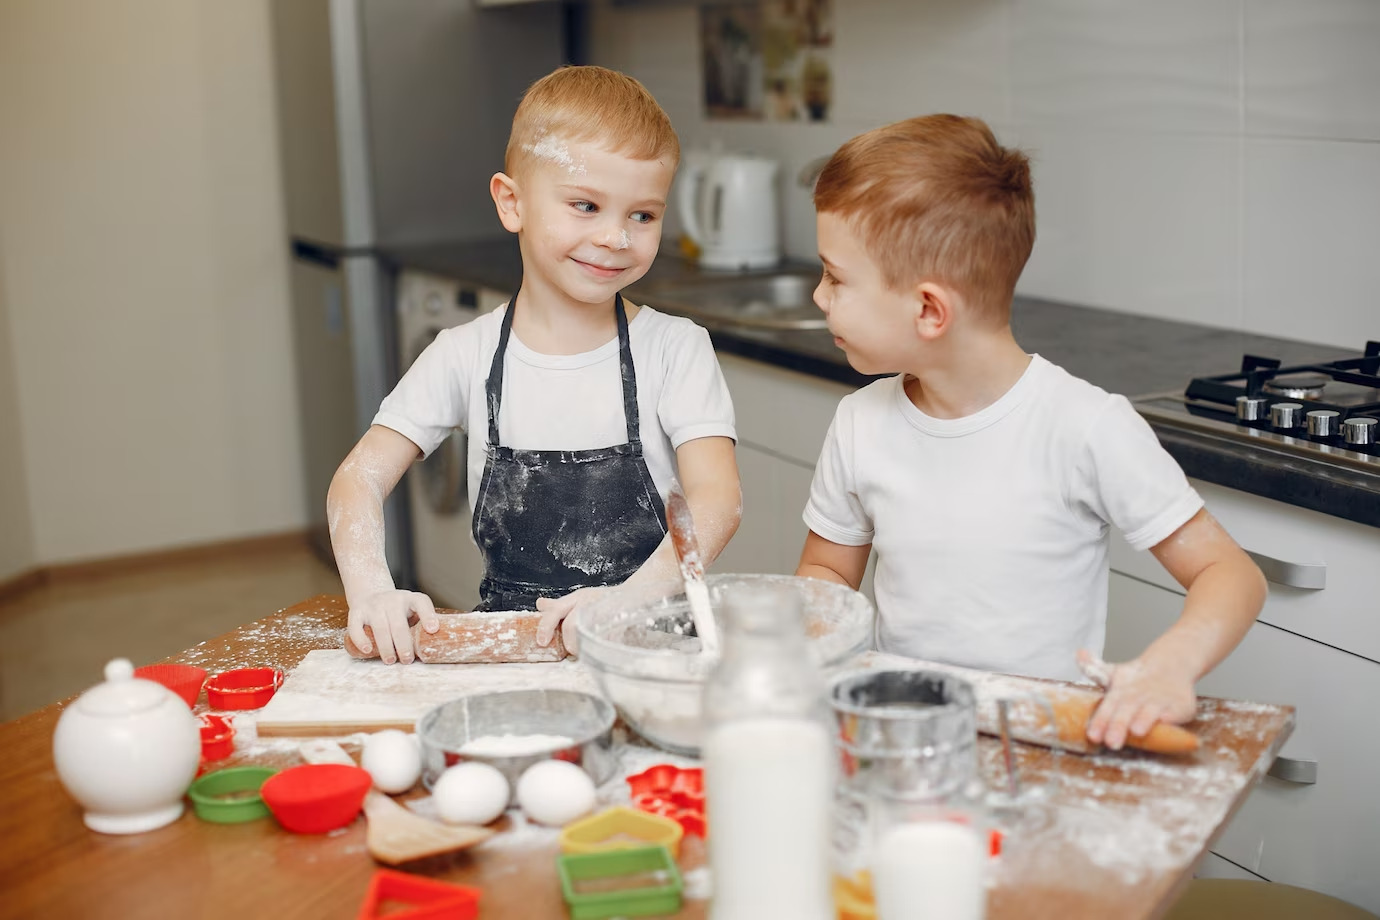 Two boys rolling out dough at table with cooking supplies